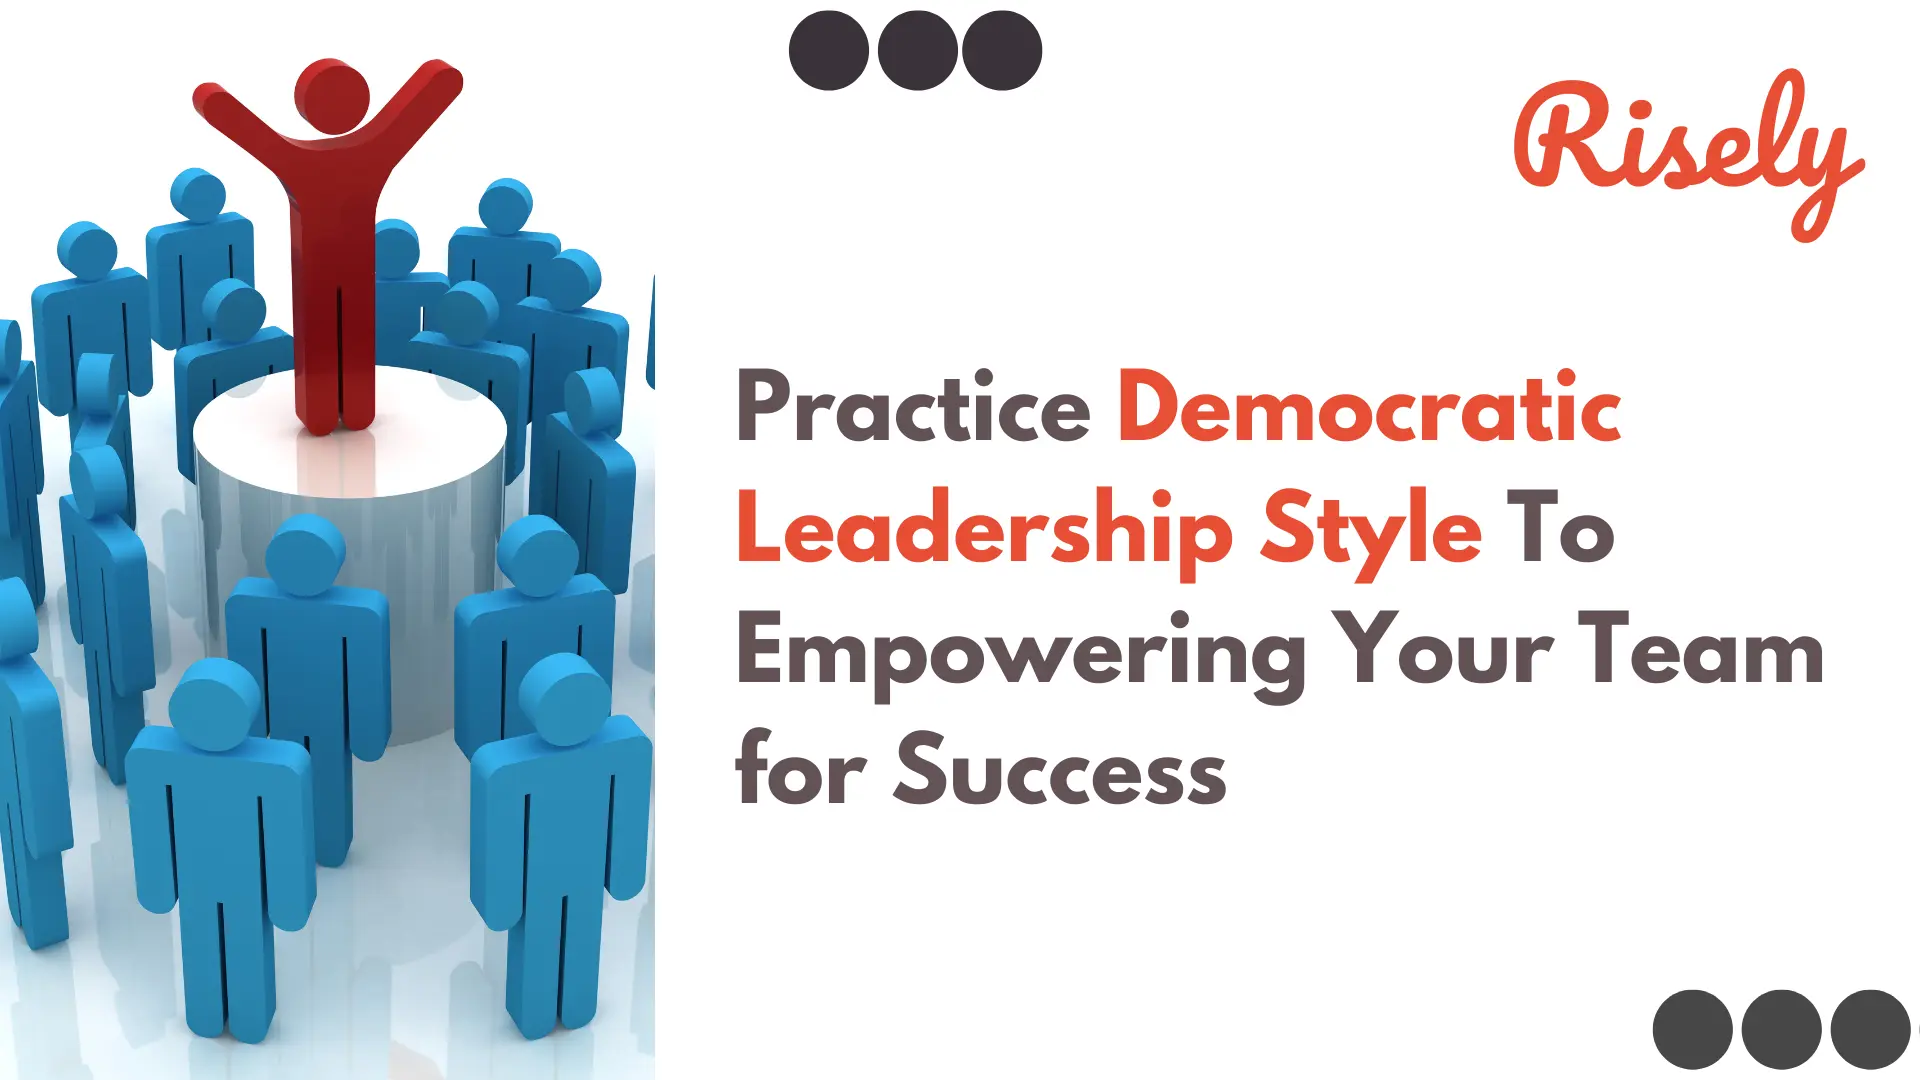 Practice Democratic Leadership Style To Empowering Your Team for Success